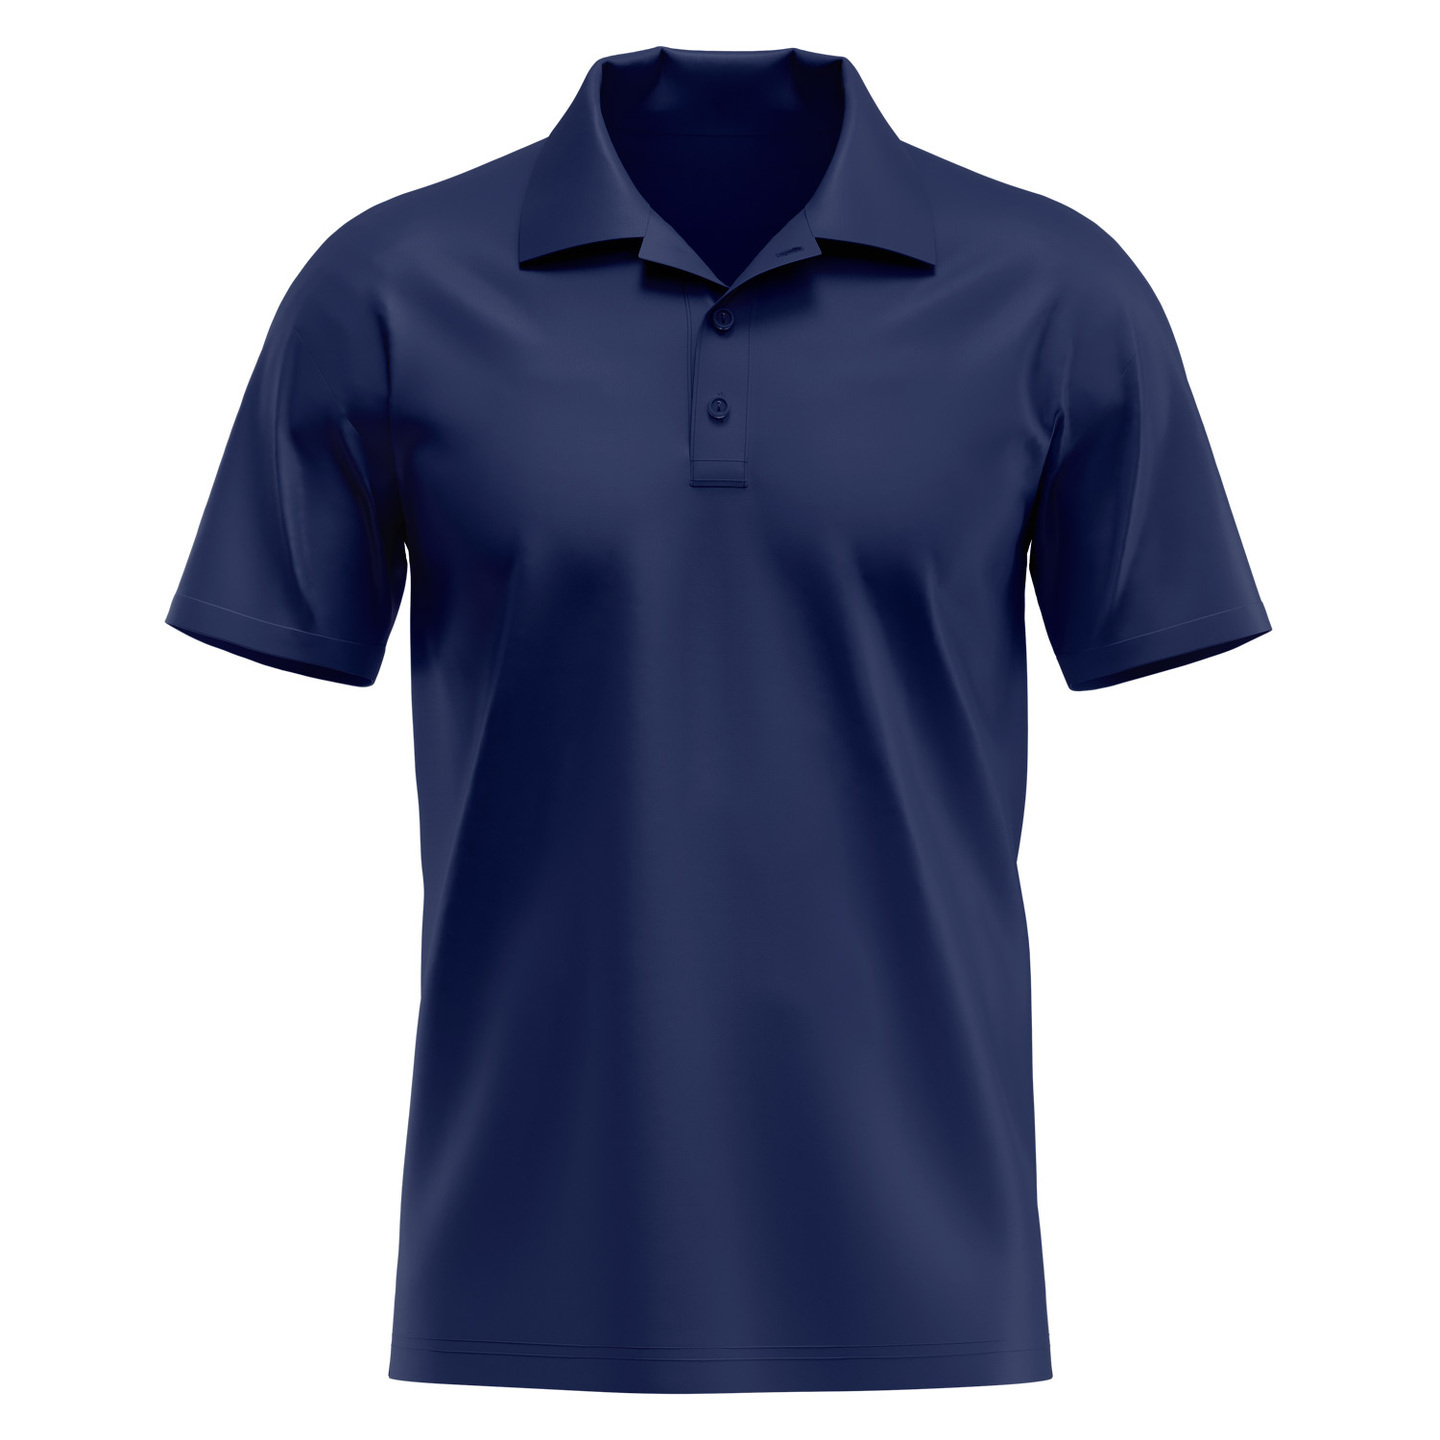 Navy Blue Solid Polo T-shirt